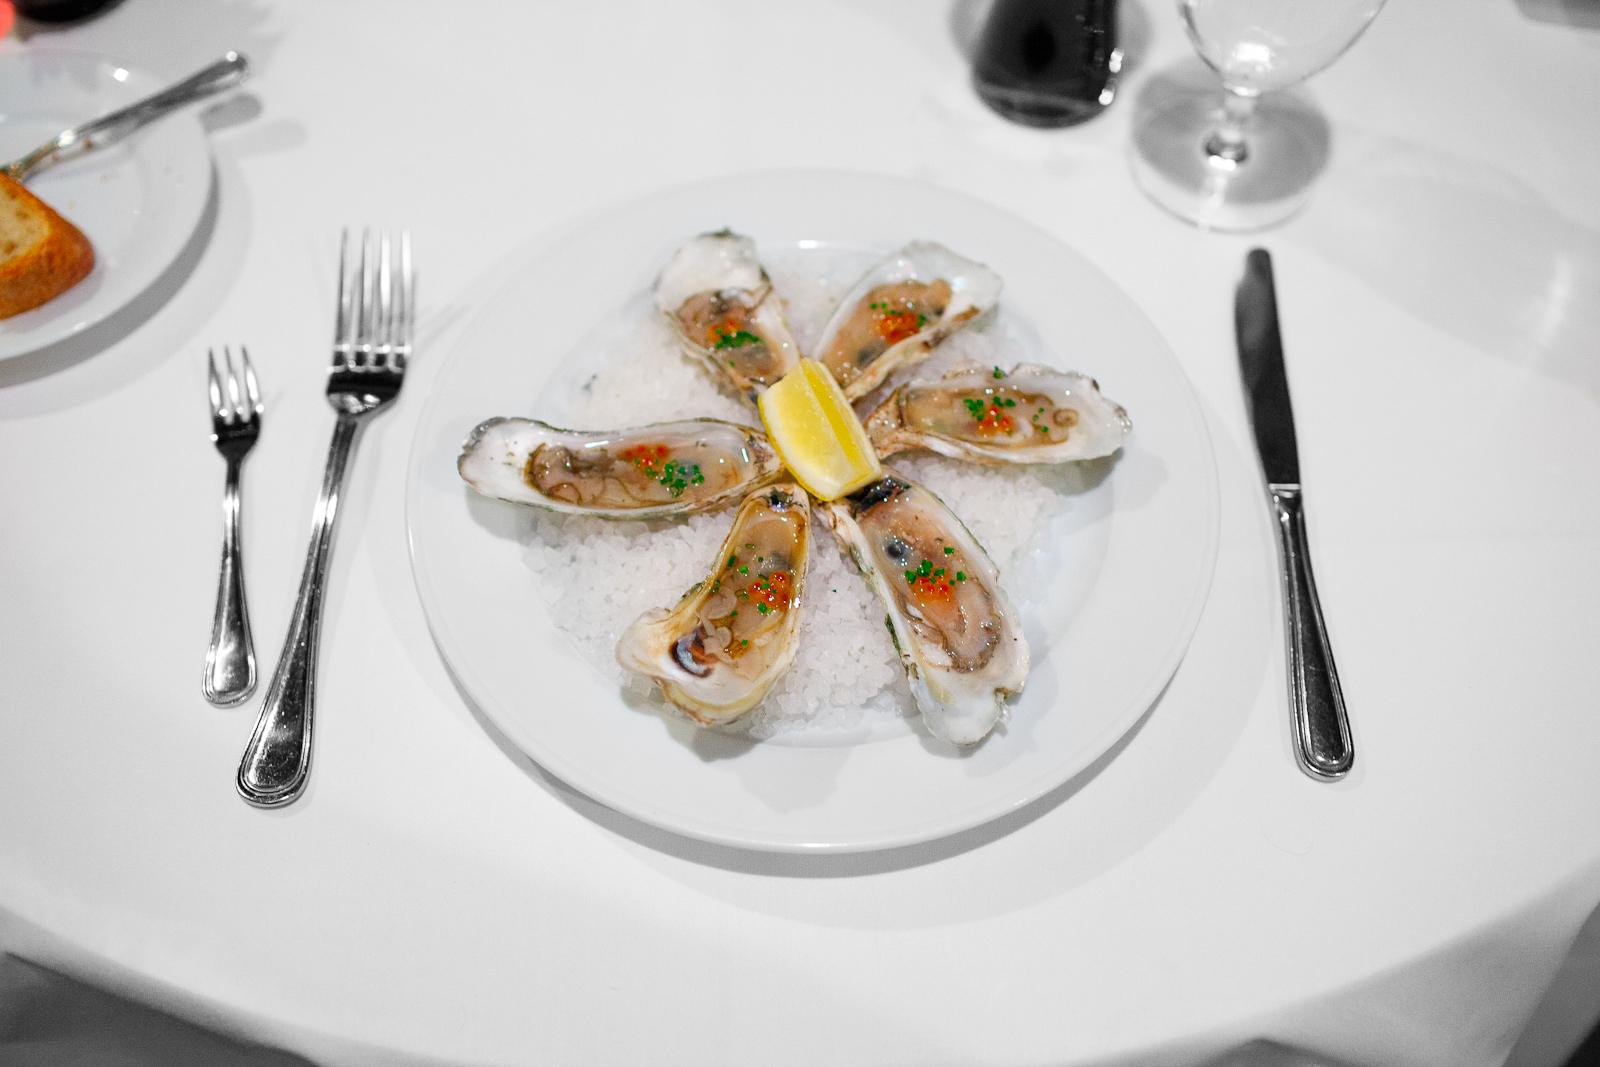 Capers "blades" oysters on the half shell, smoked steelhead roe, chardonnay mignonette ($16)